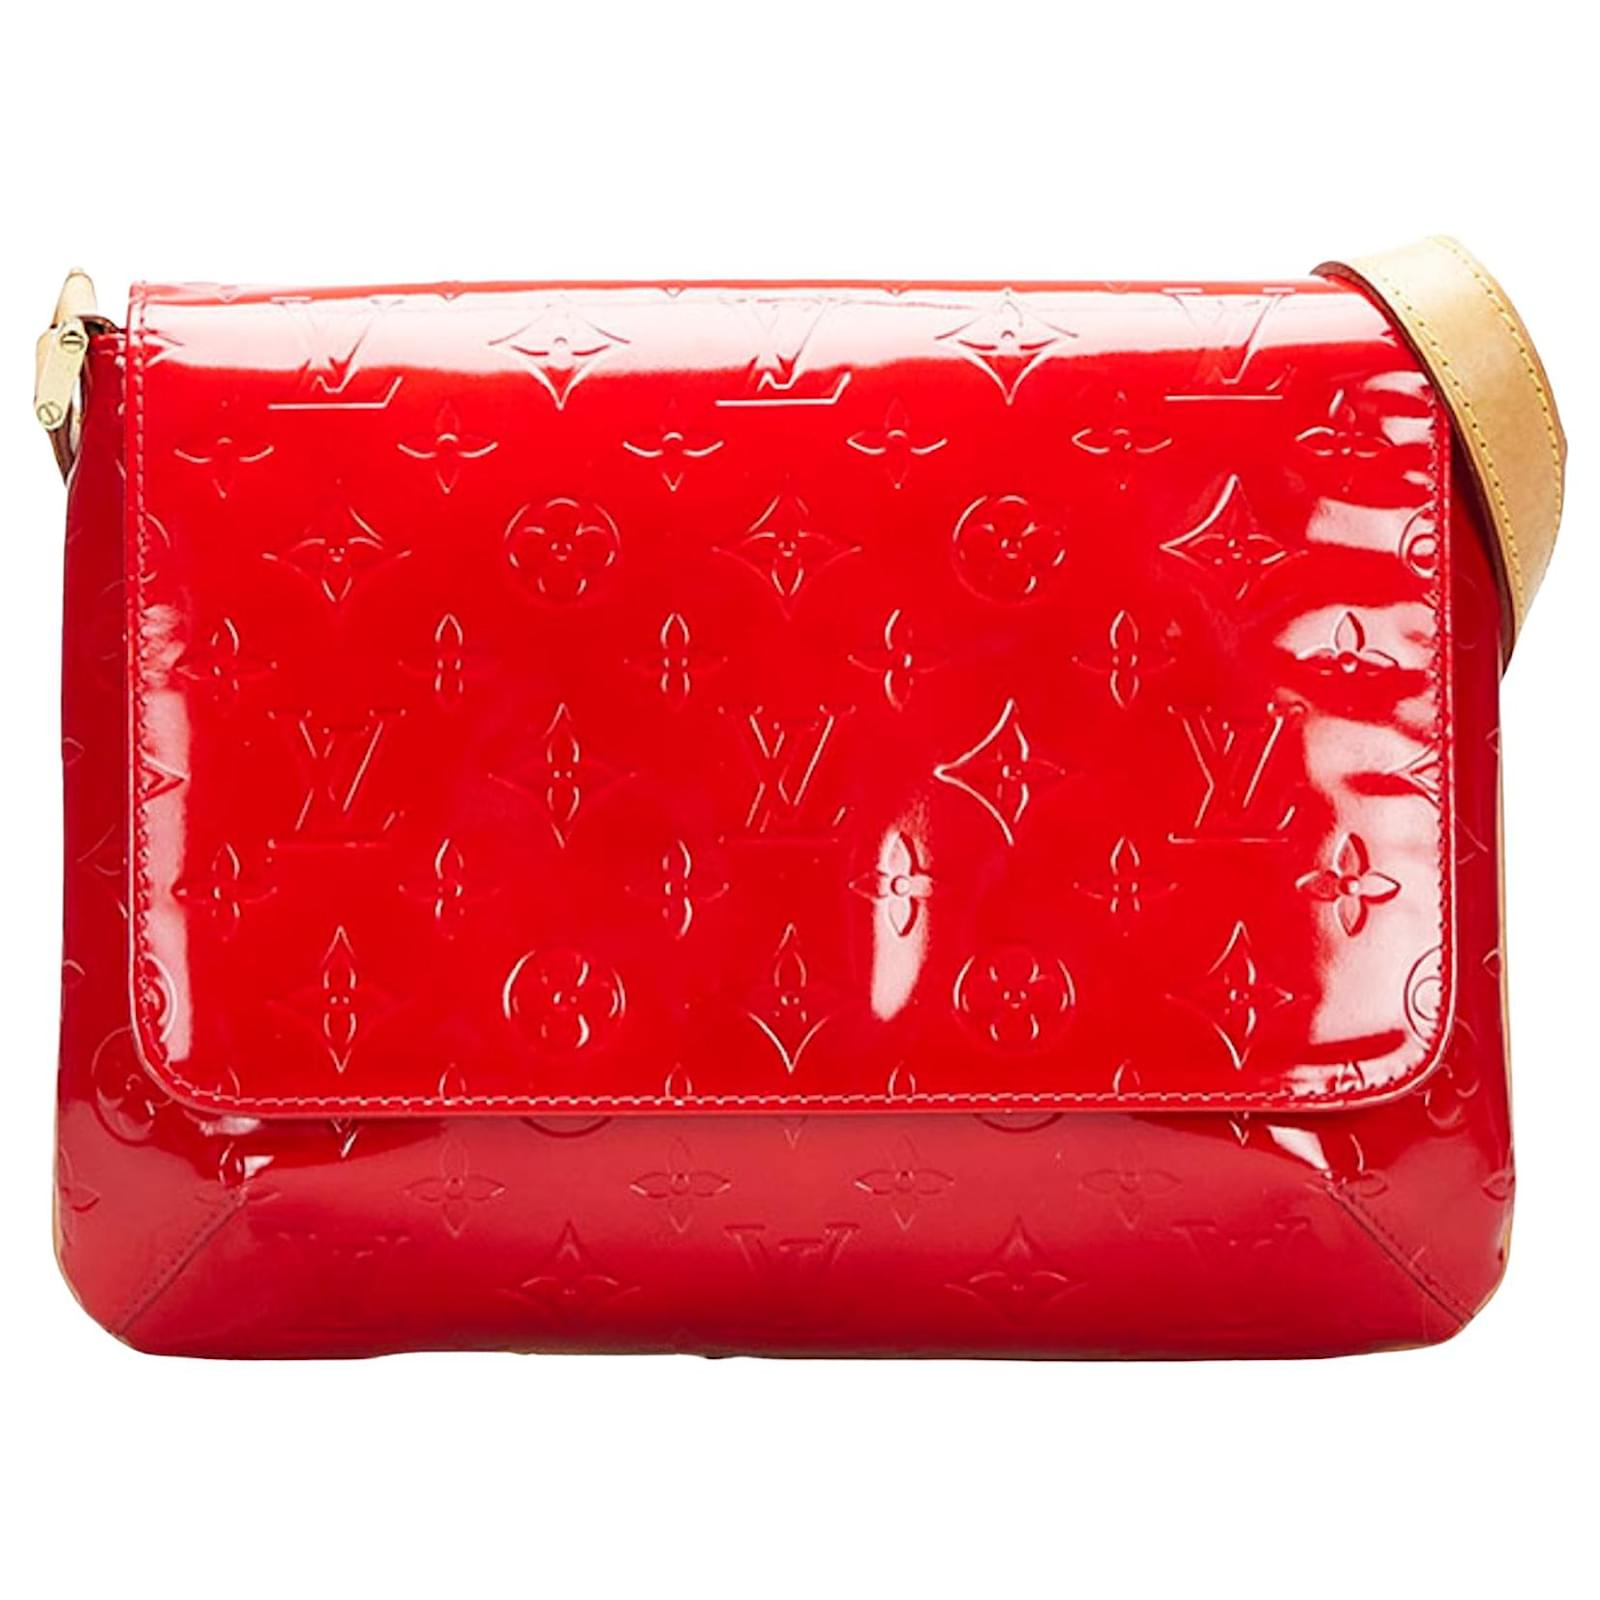 Thompson patent leather handbag Louis Vuitton Red in Patent